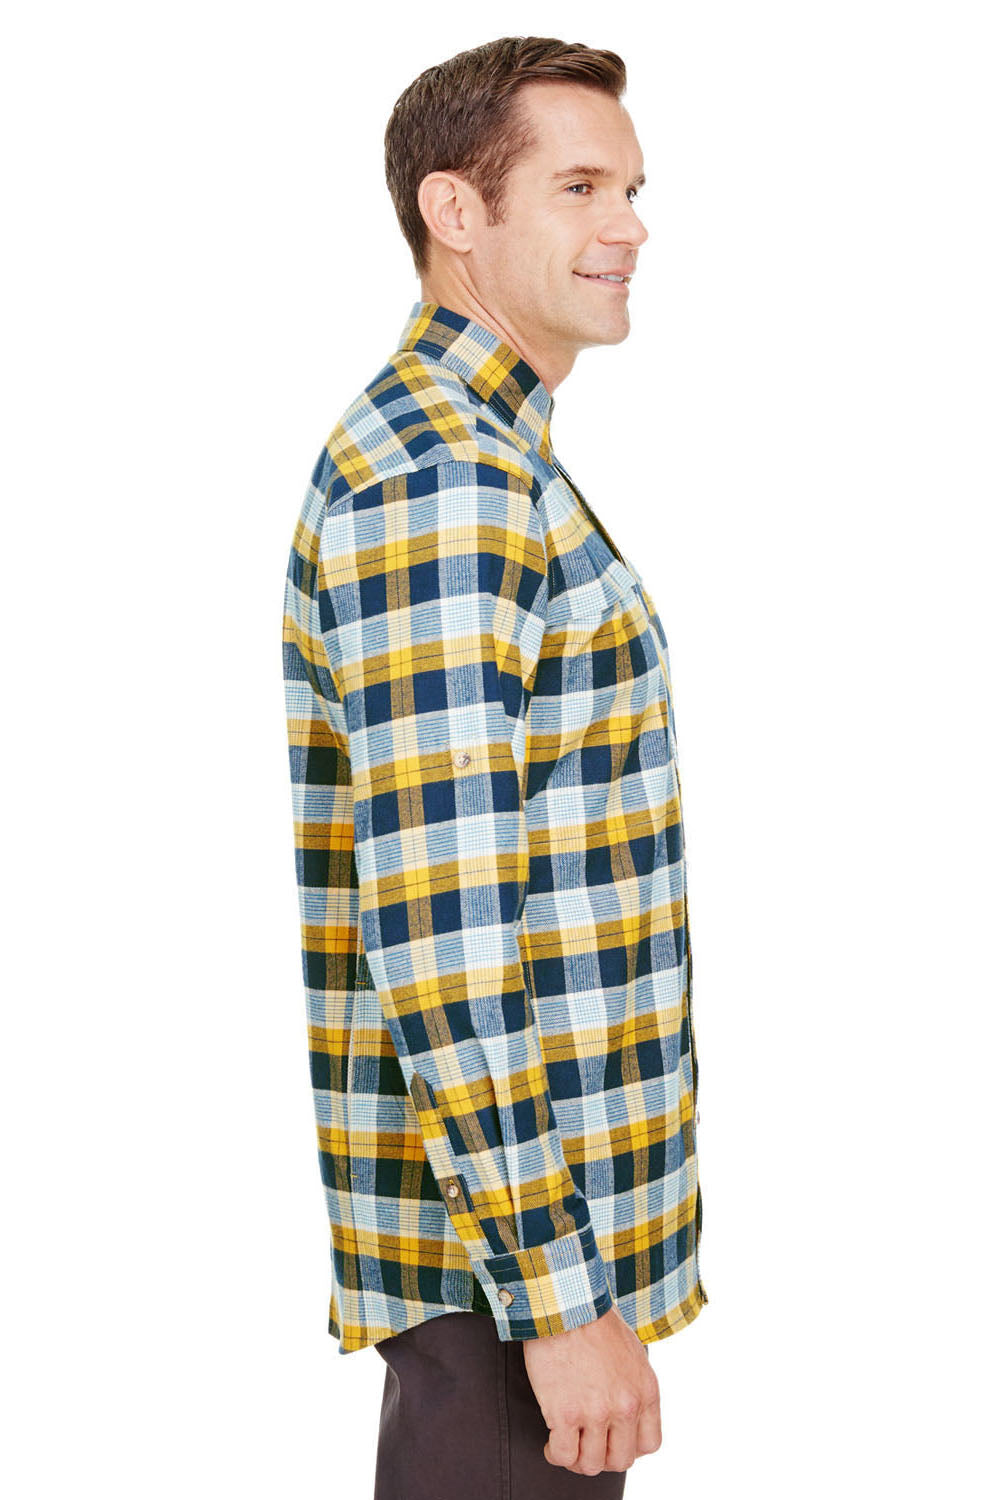 Backpacker BP7091 Mens Stretch Flannel Long Sleeve Button Down Shirt w/ Double Pockets Gold/Navy Side